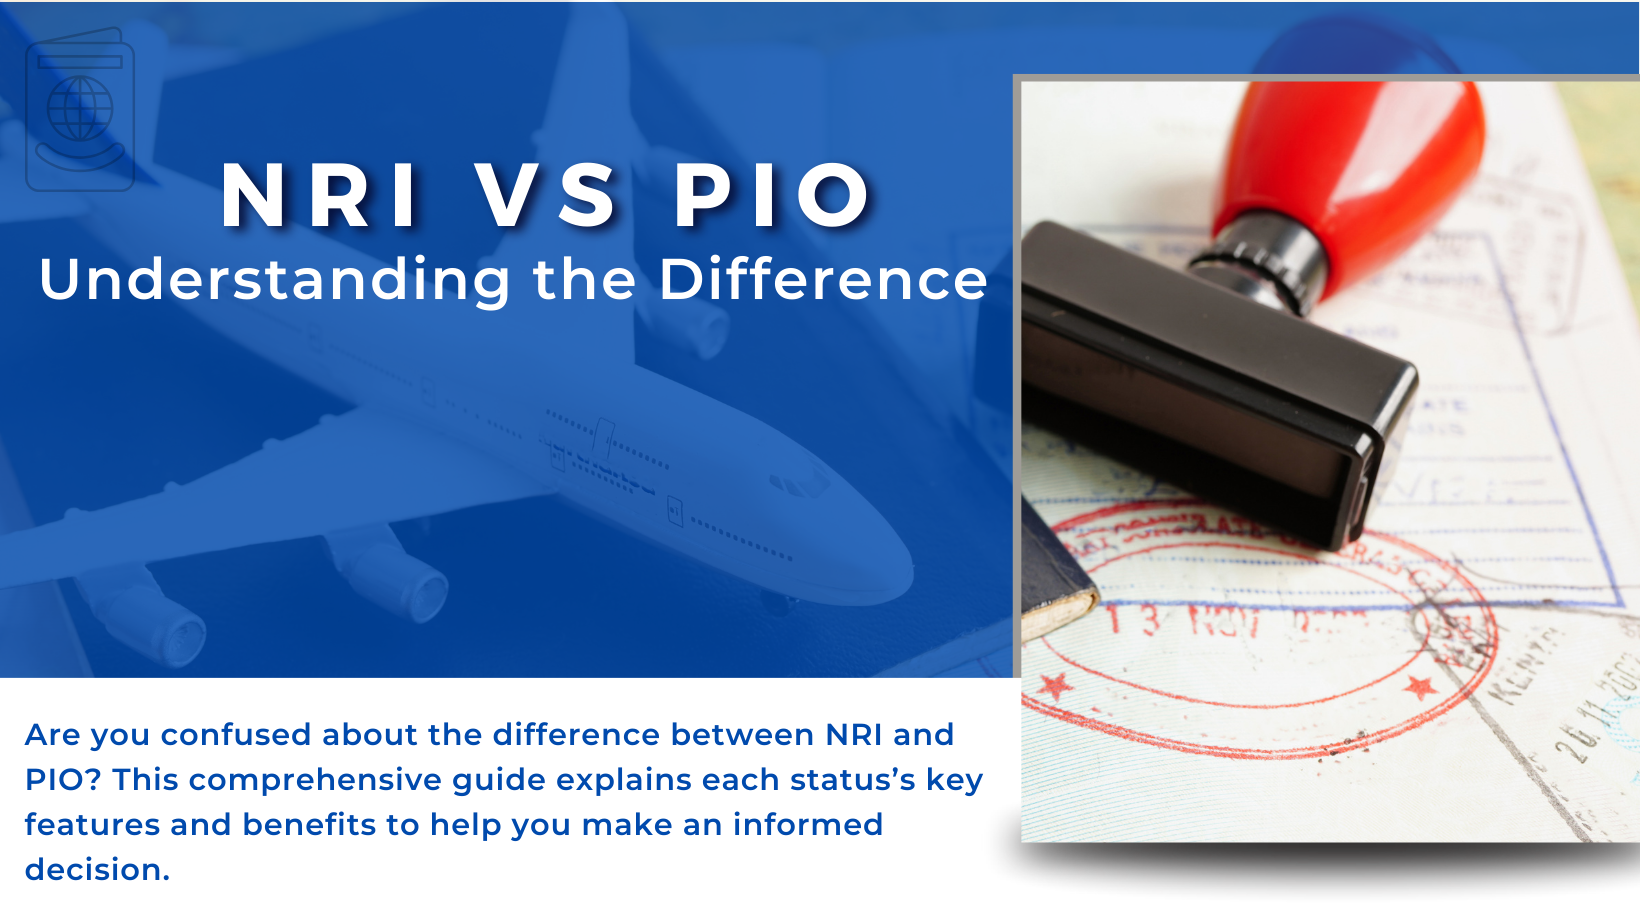 nri and pio difference